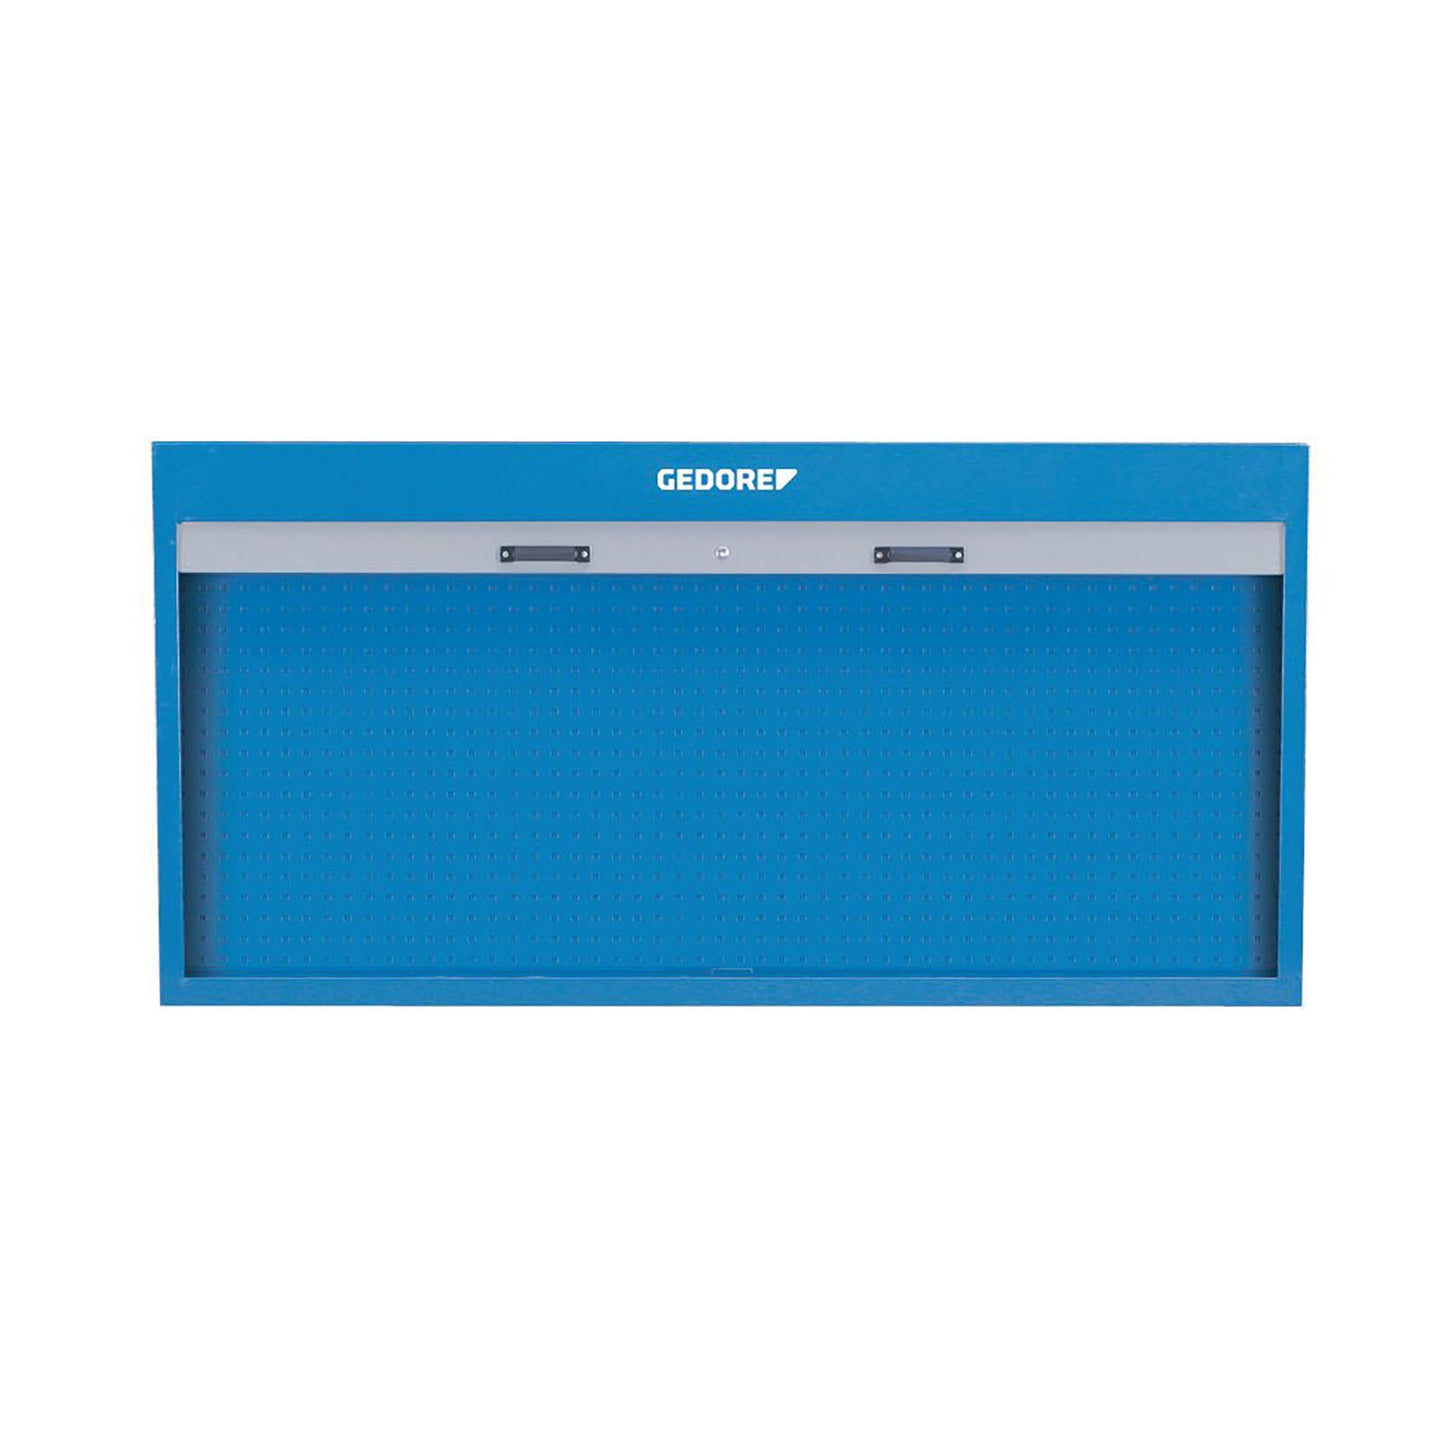 GEDORE R 1500 L - Tool cabinet (6617910)